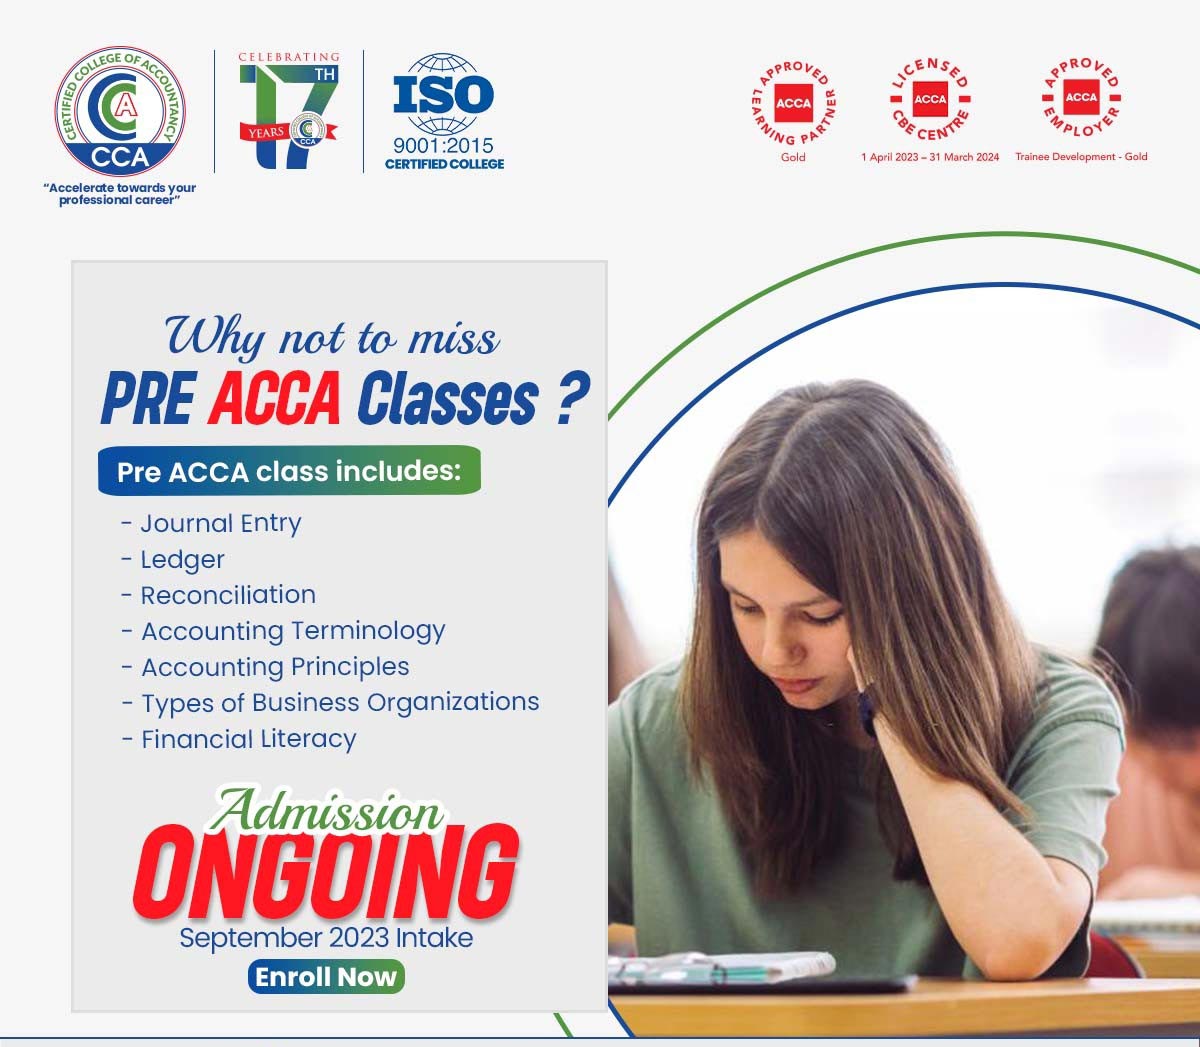 Why Choose Pre-ACCA Classes at Certified College of Accountancy CCA